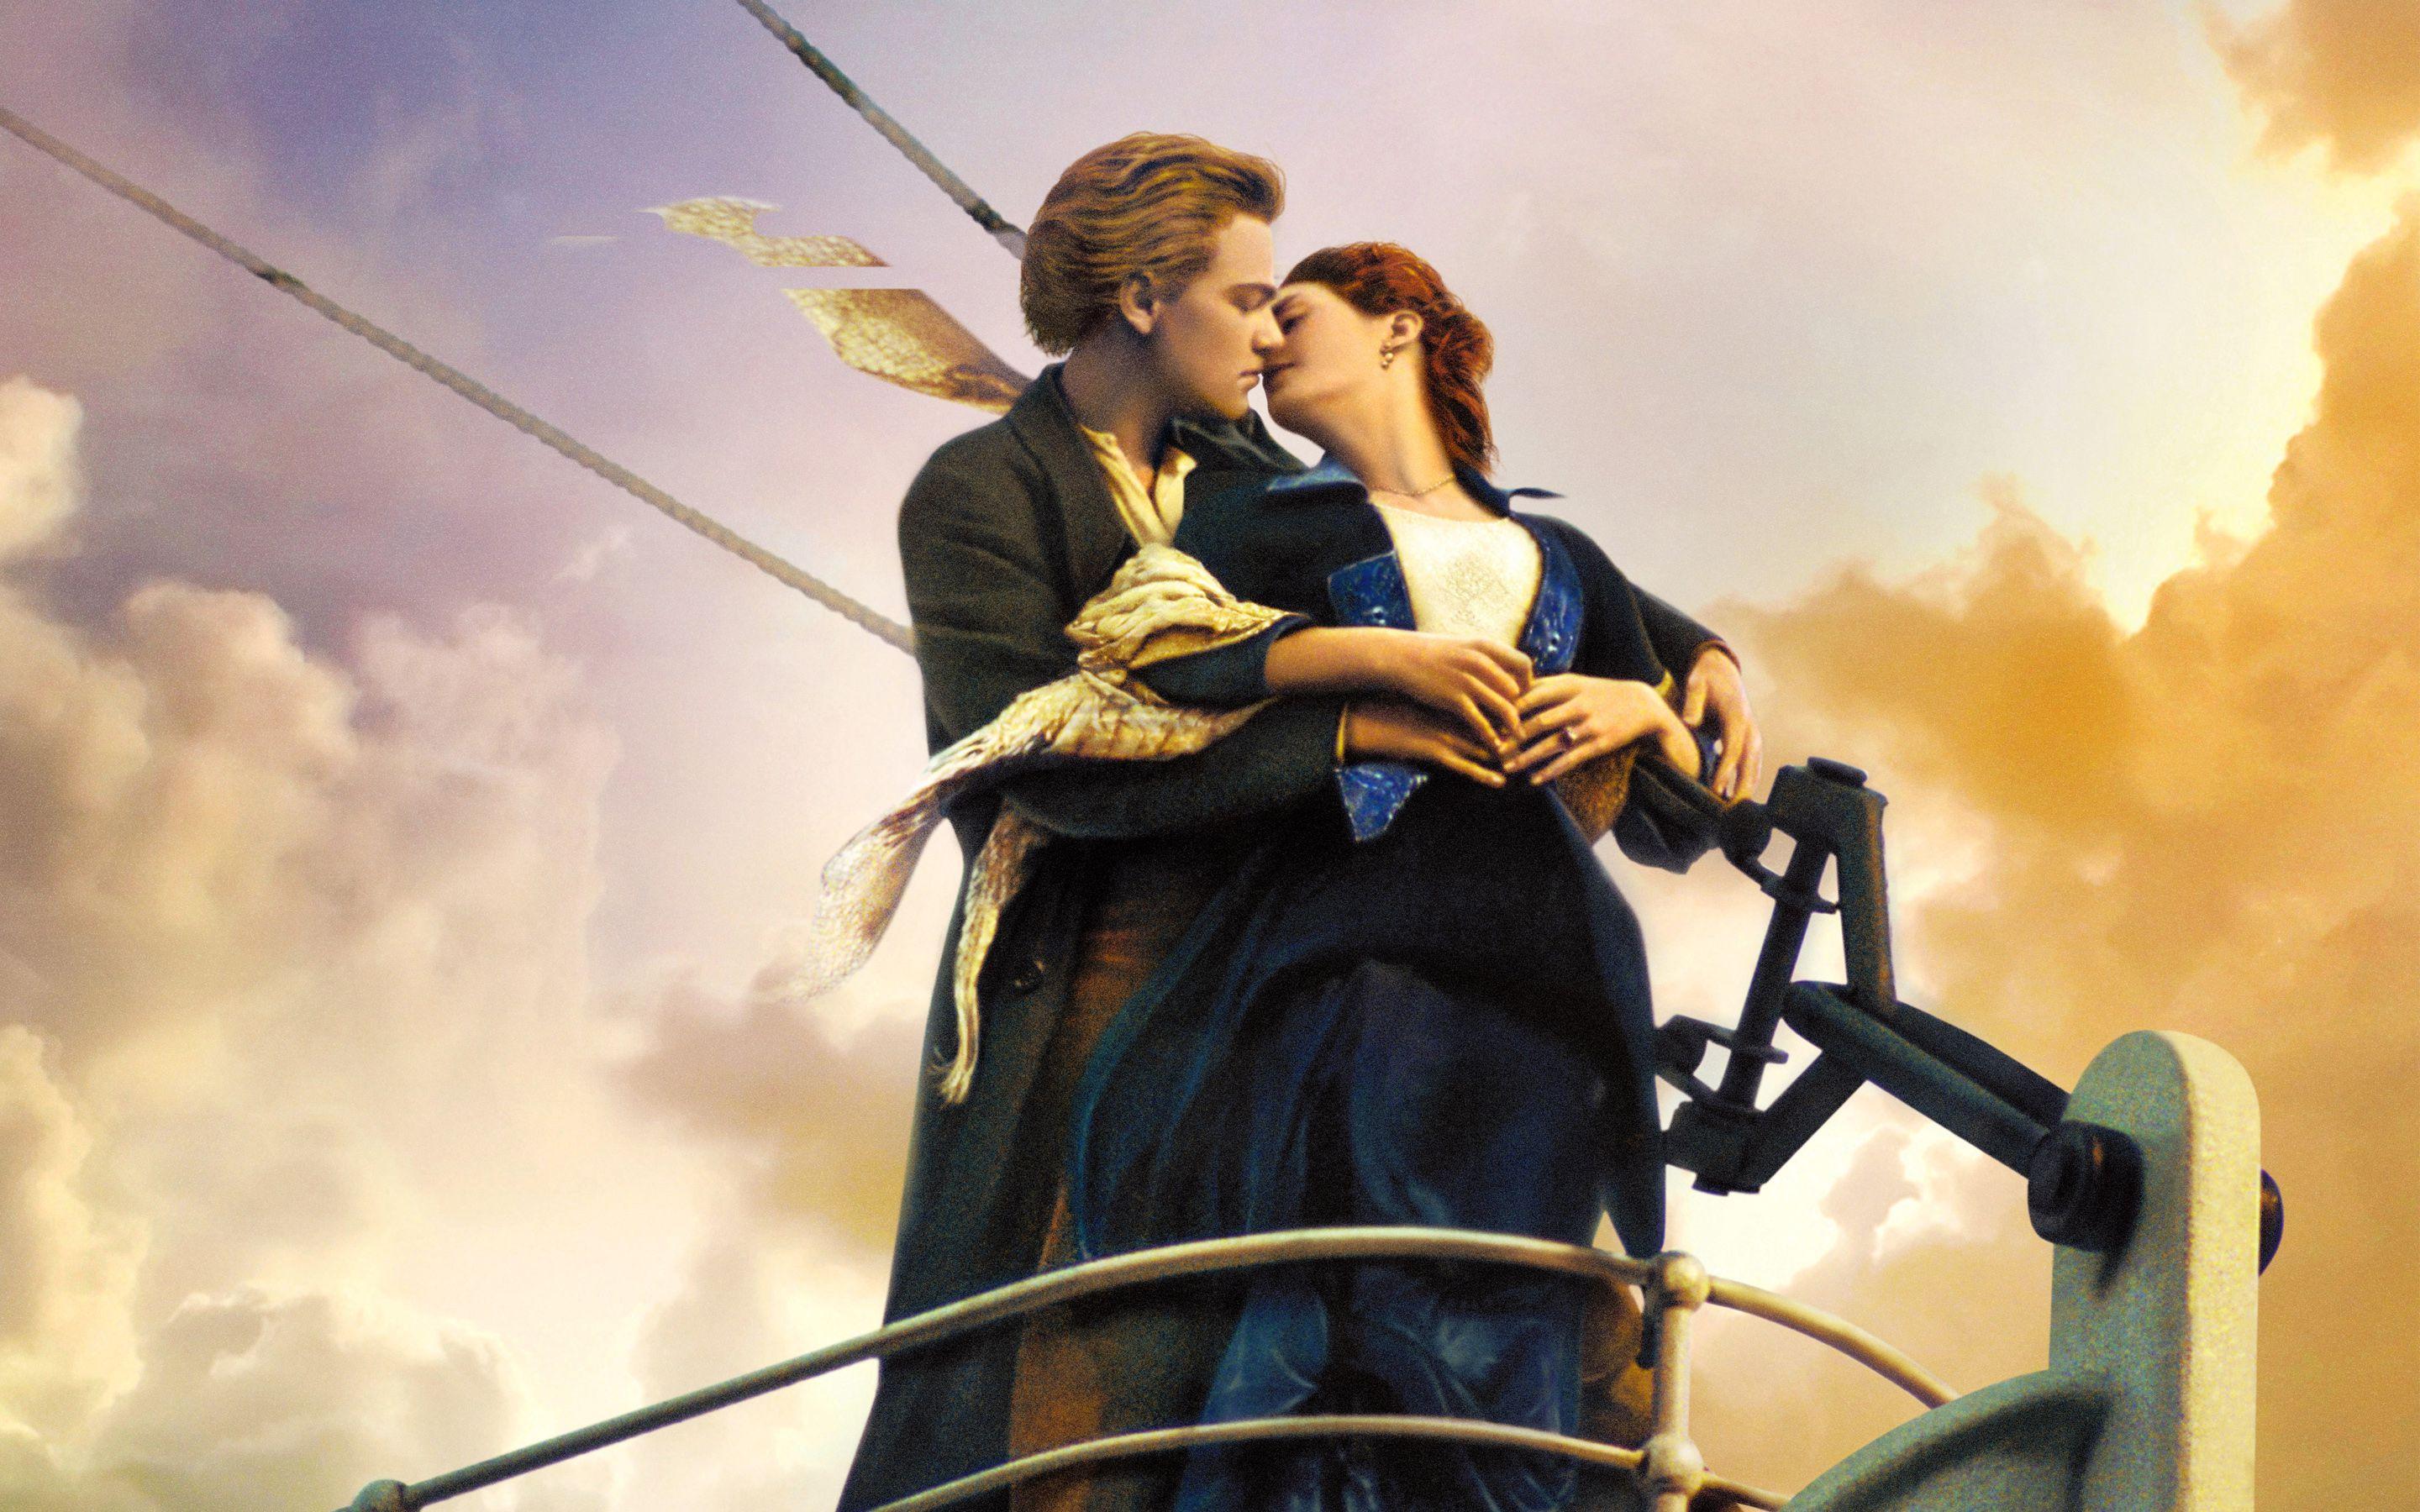 Titanic': James Cameron probes Jack and Rose door theory, finds error